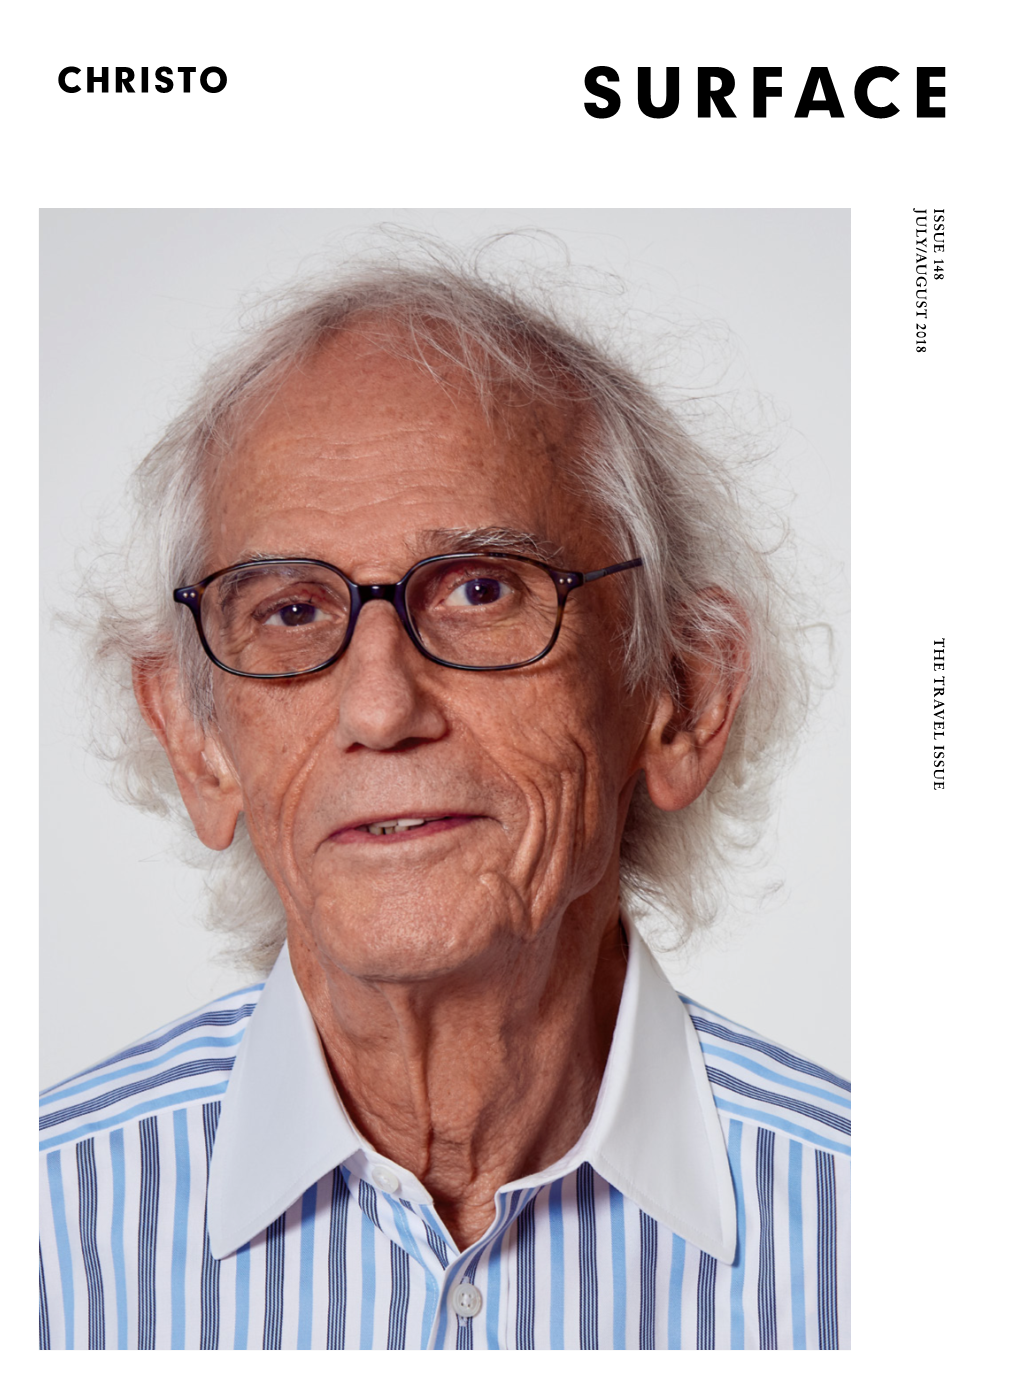 Christo July/August 2018 July/August Issue 148